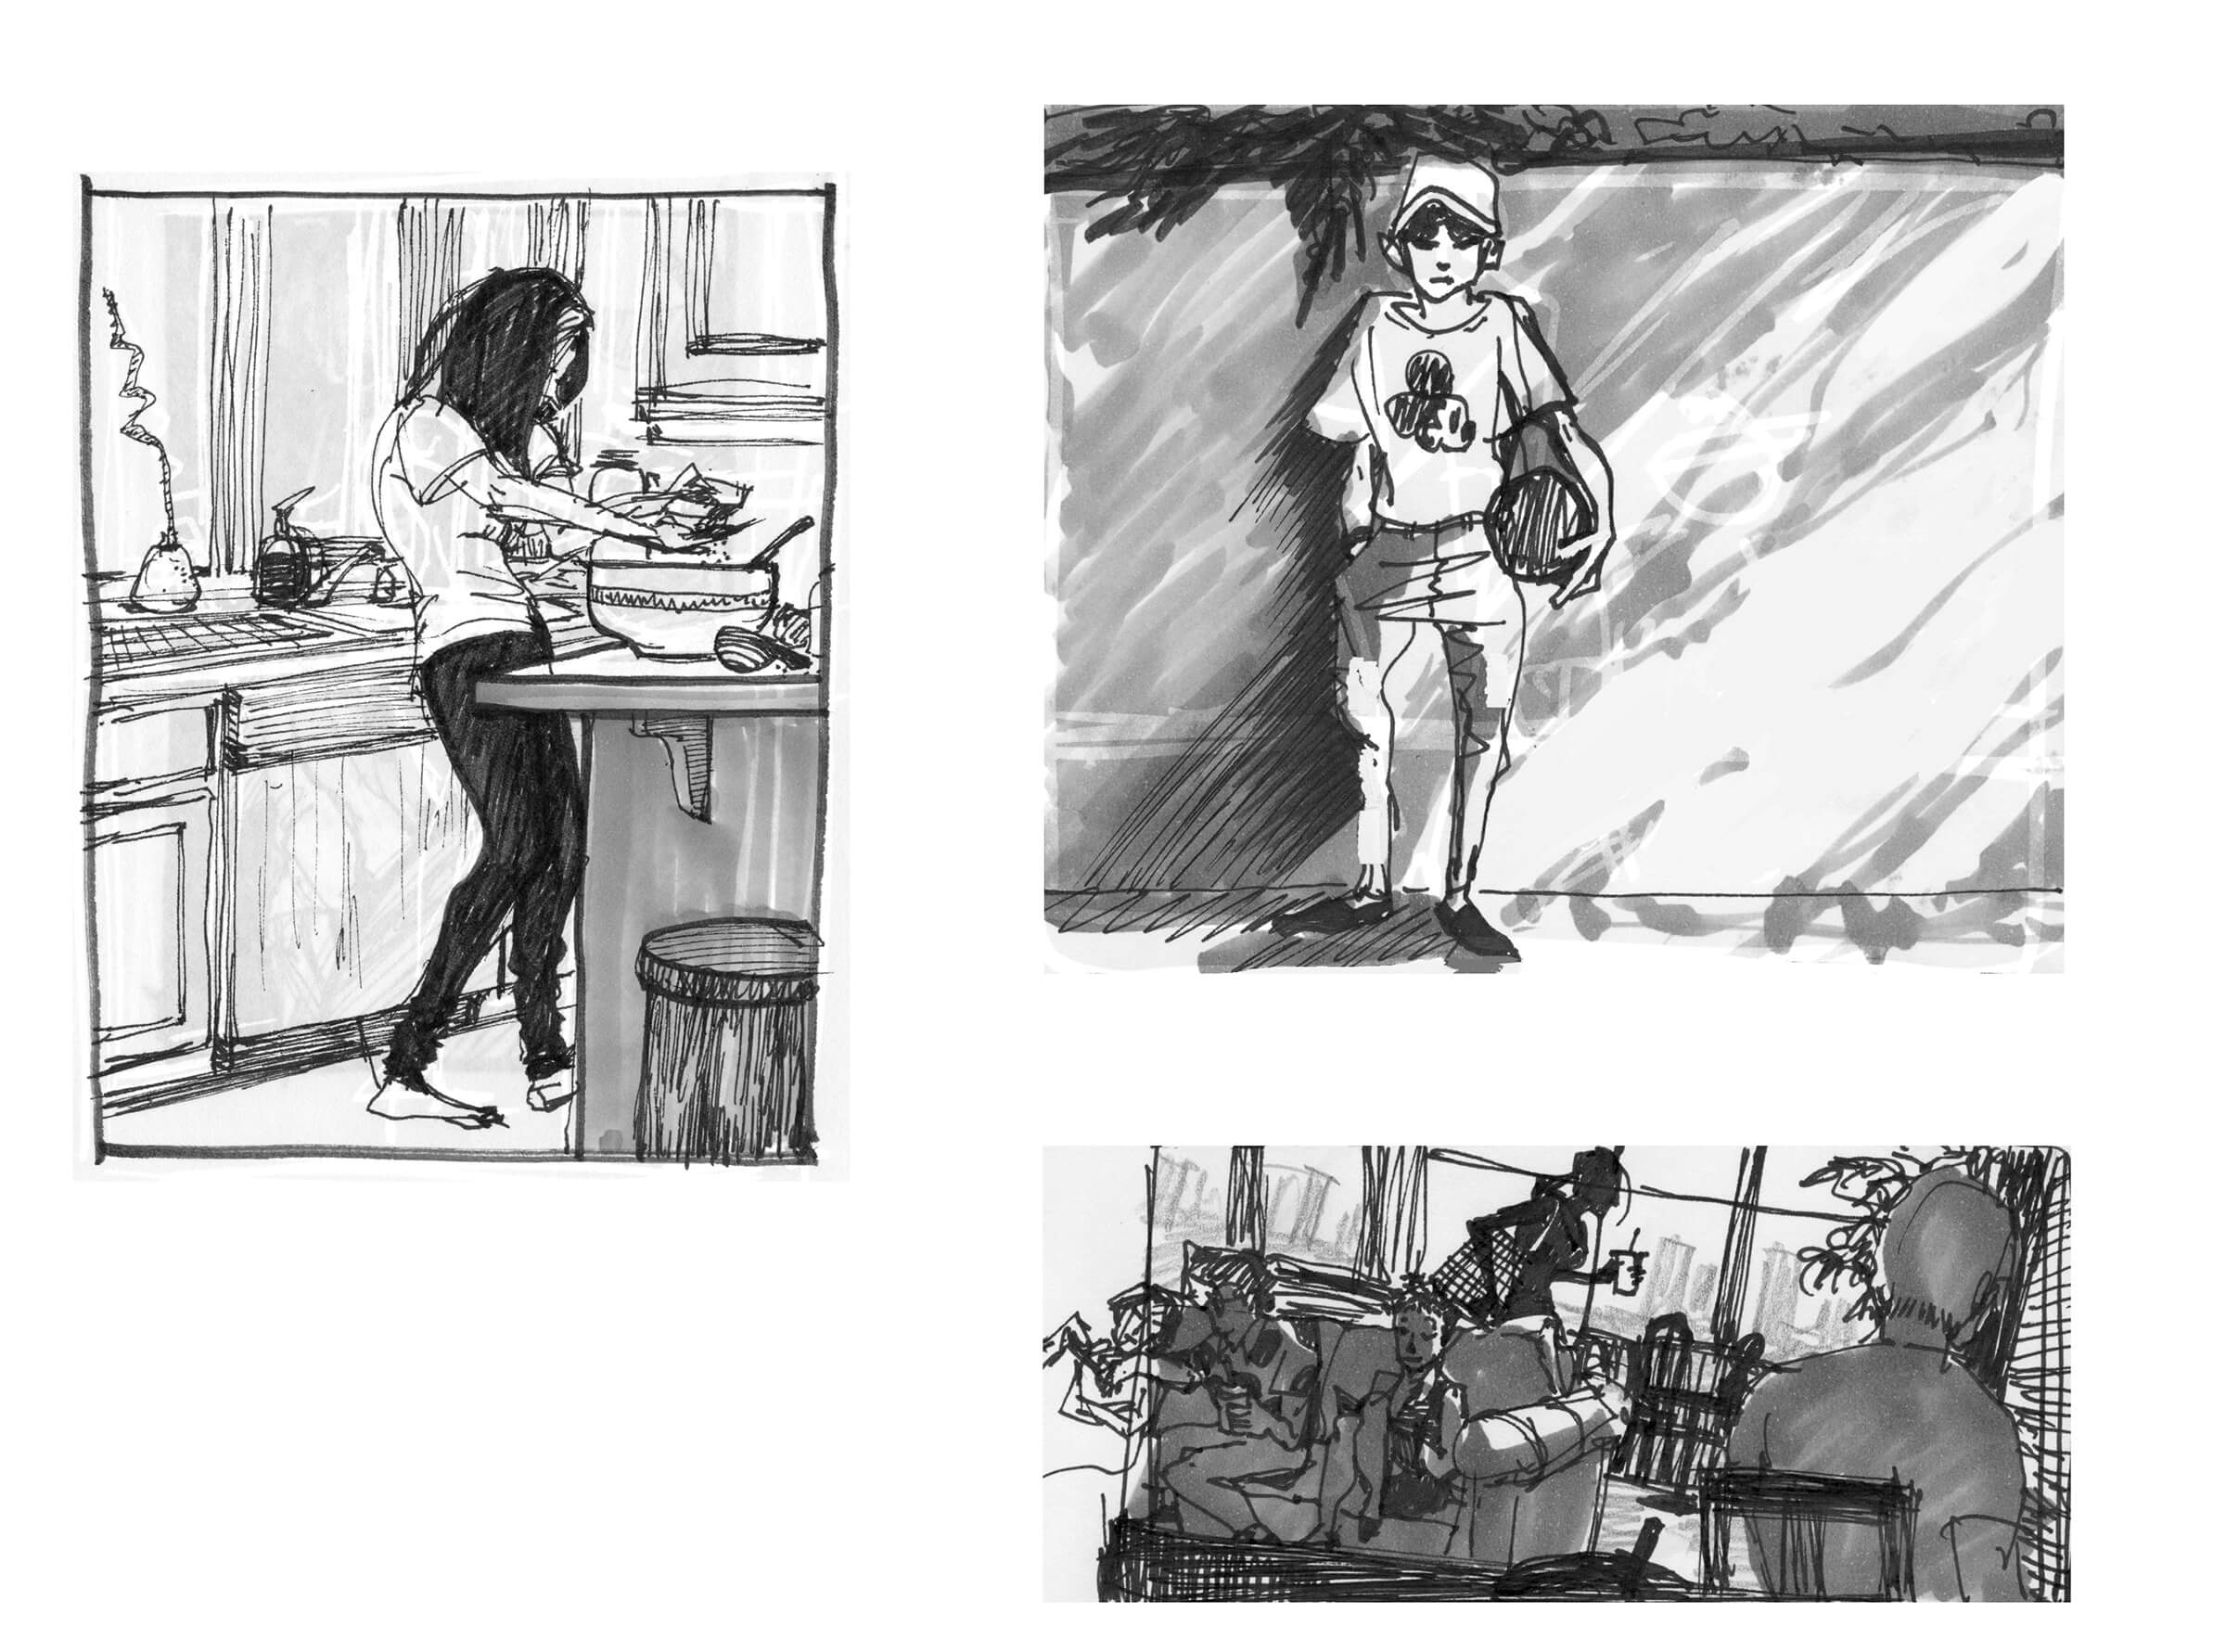 black and white drawings of a woman cooking, a boy in a mickey mouse t-shirt holding a ball, and a cafe scene